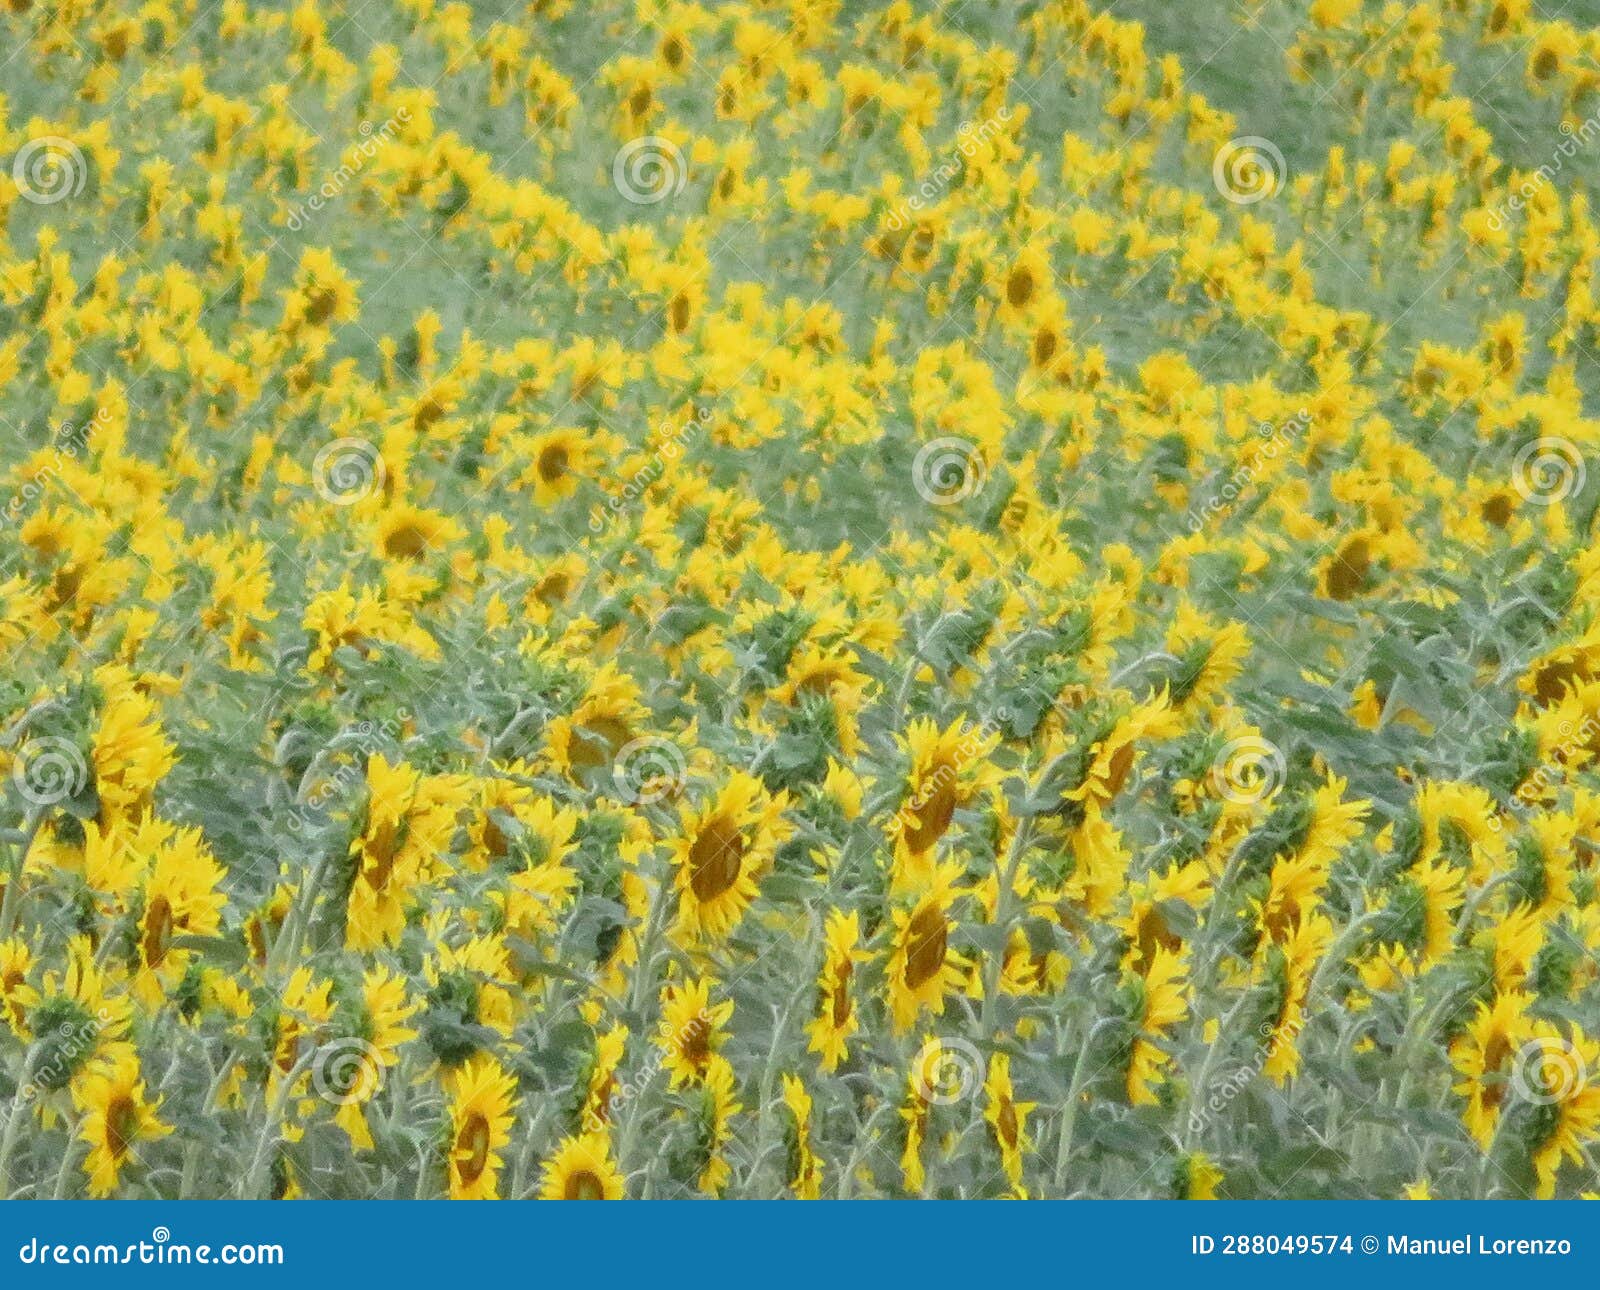 beautiful scenery with yellow sunflowers flowers big pipes